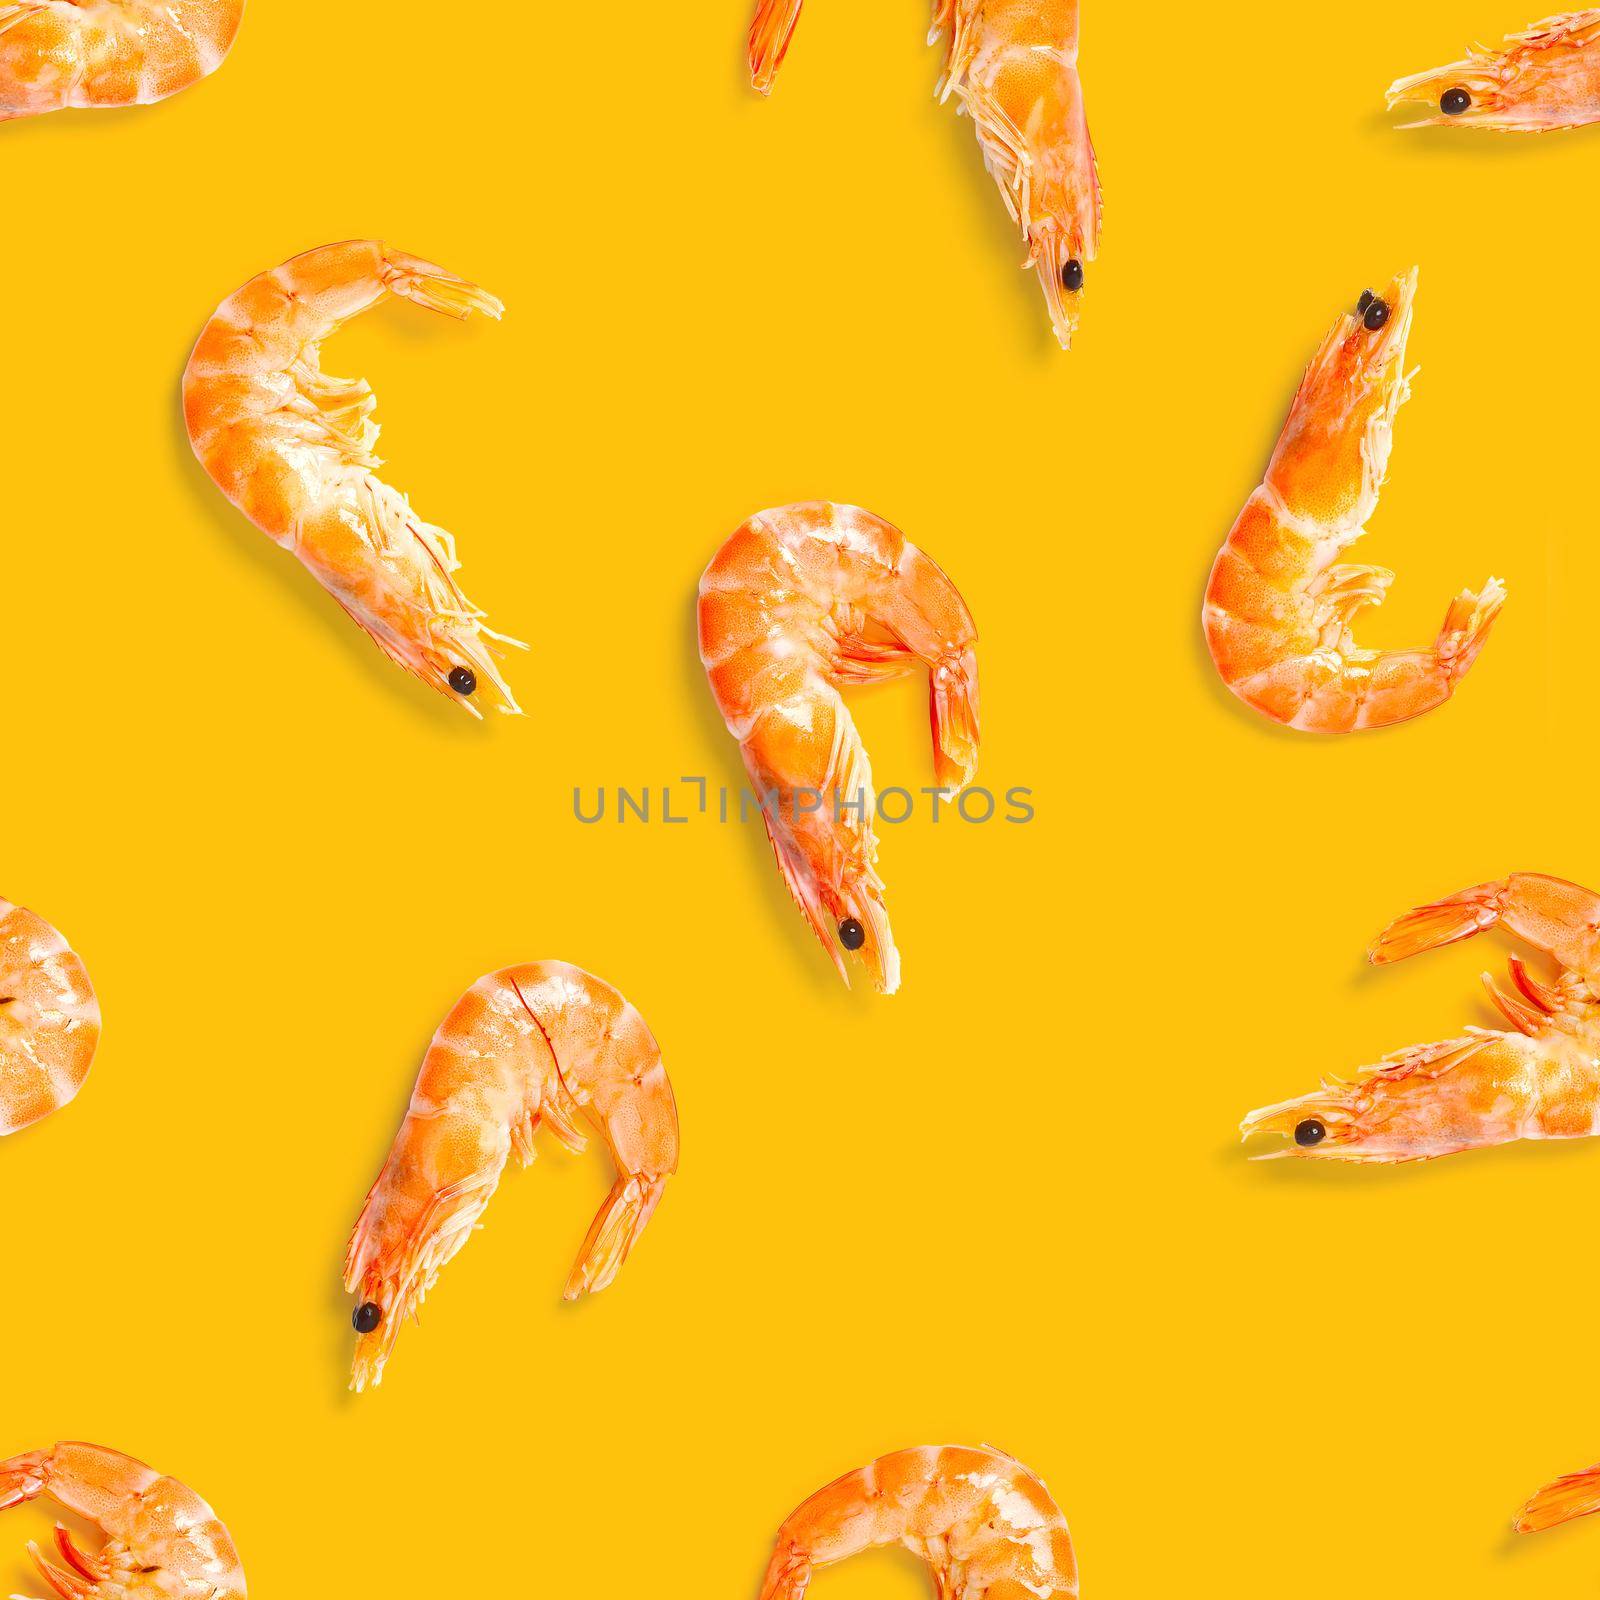 Tiger shrimp. Seamless pattern made from Prawn isolated on a orange background. Seafood seamless pattern with shrimps. seafood pattern by PhotoTime